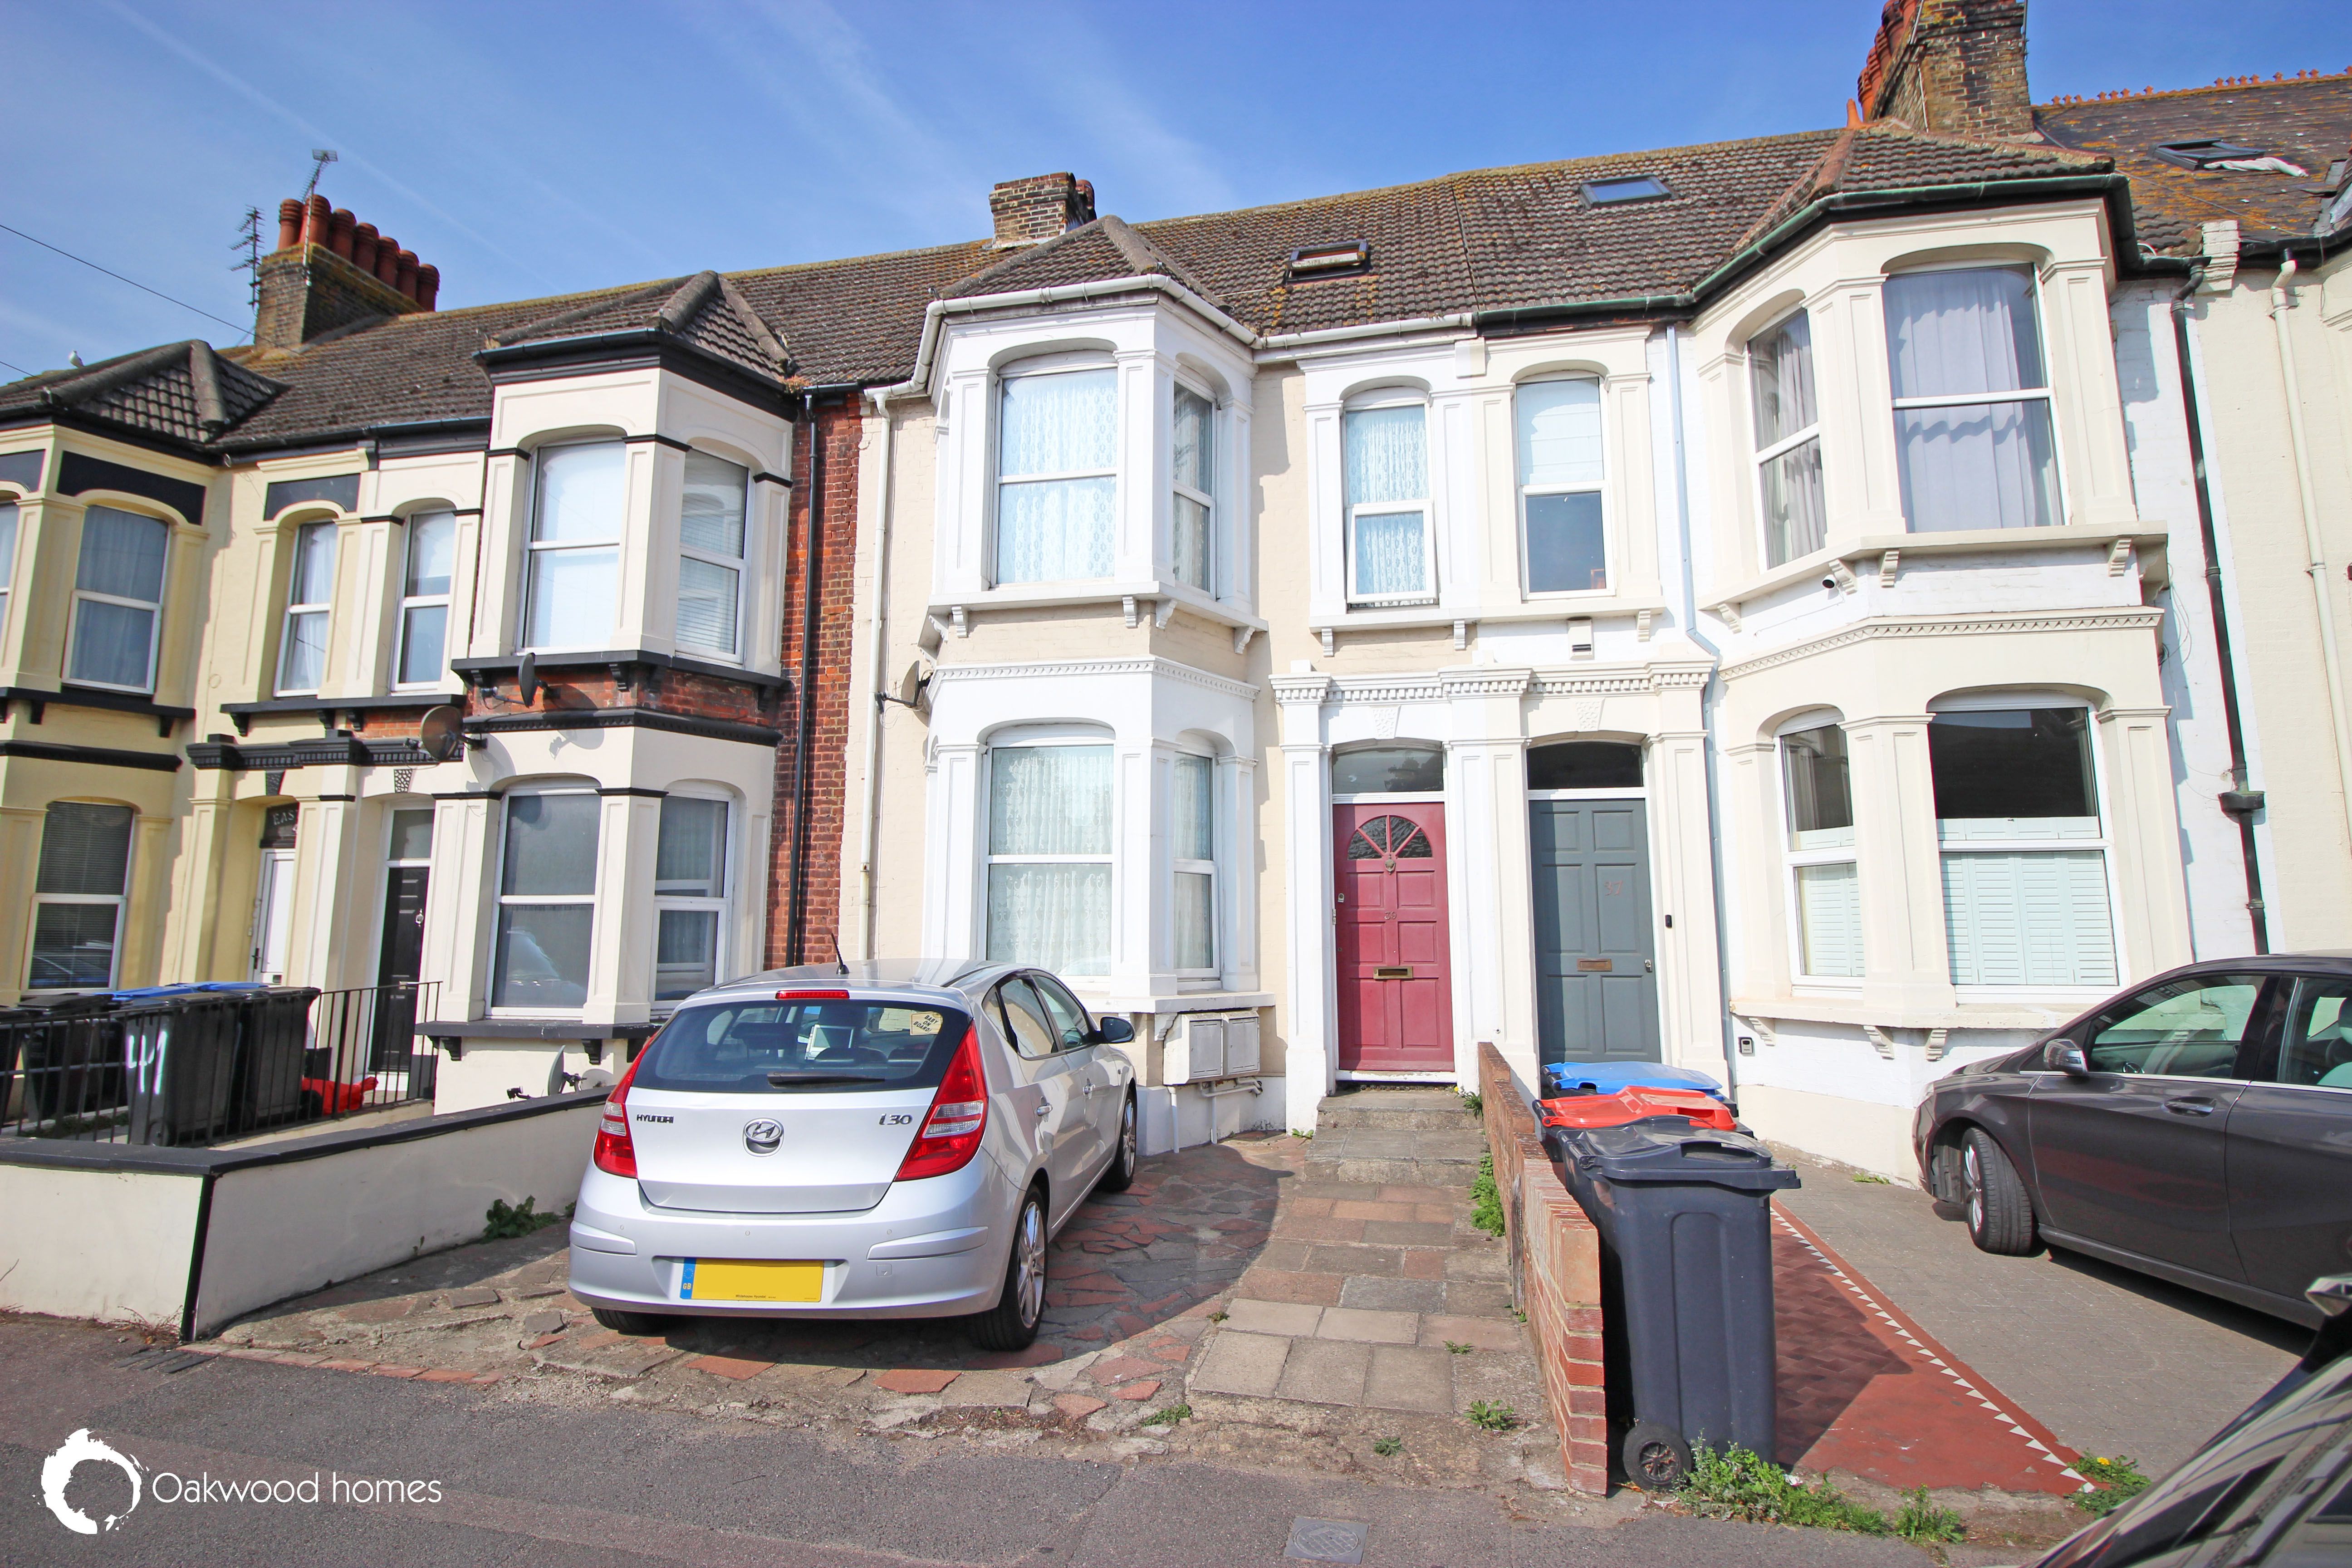 3 bed flat for sale in 39 Ramsgate Road, Margate - Property Image 1